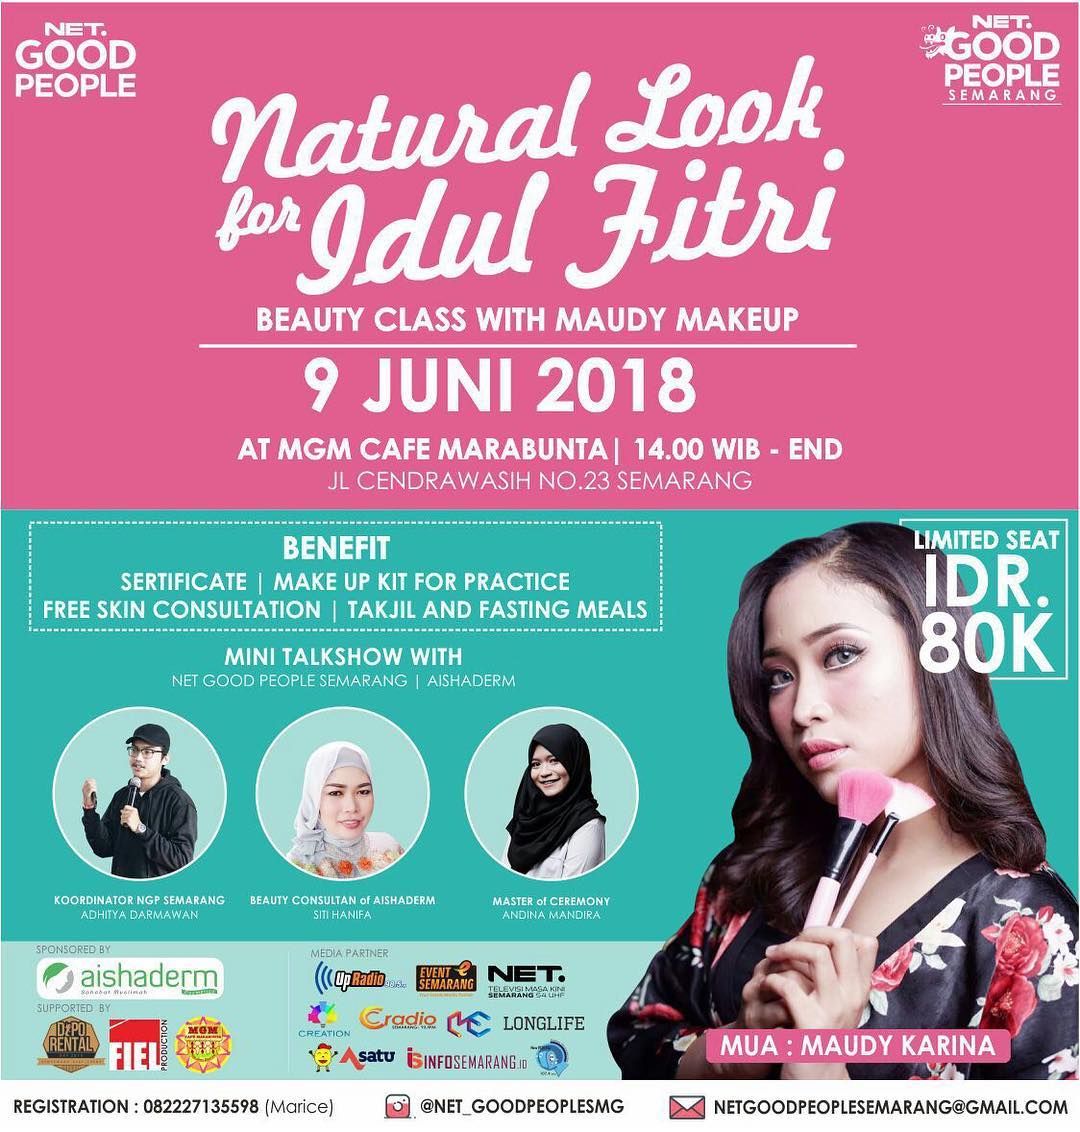 EVENT SEMARANG - NATURAL LOOK FOR IDUL FITRI BEAUTY CLASS WITH MAUDY MAKE UP AND MINI TALKSHOW WITH NET